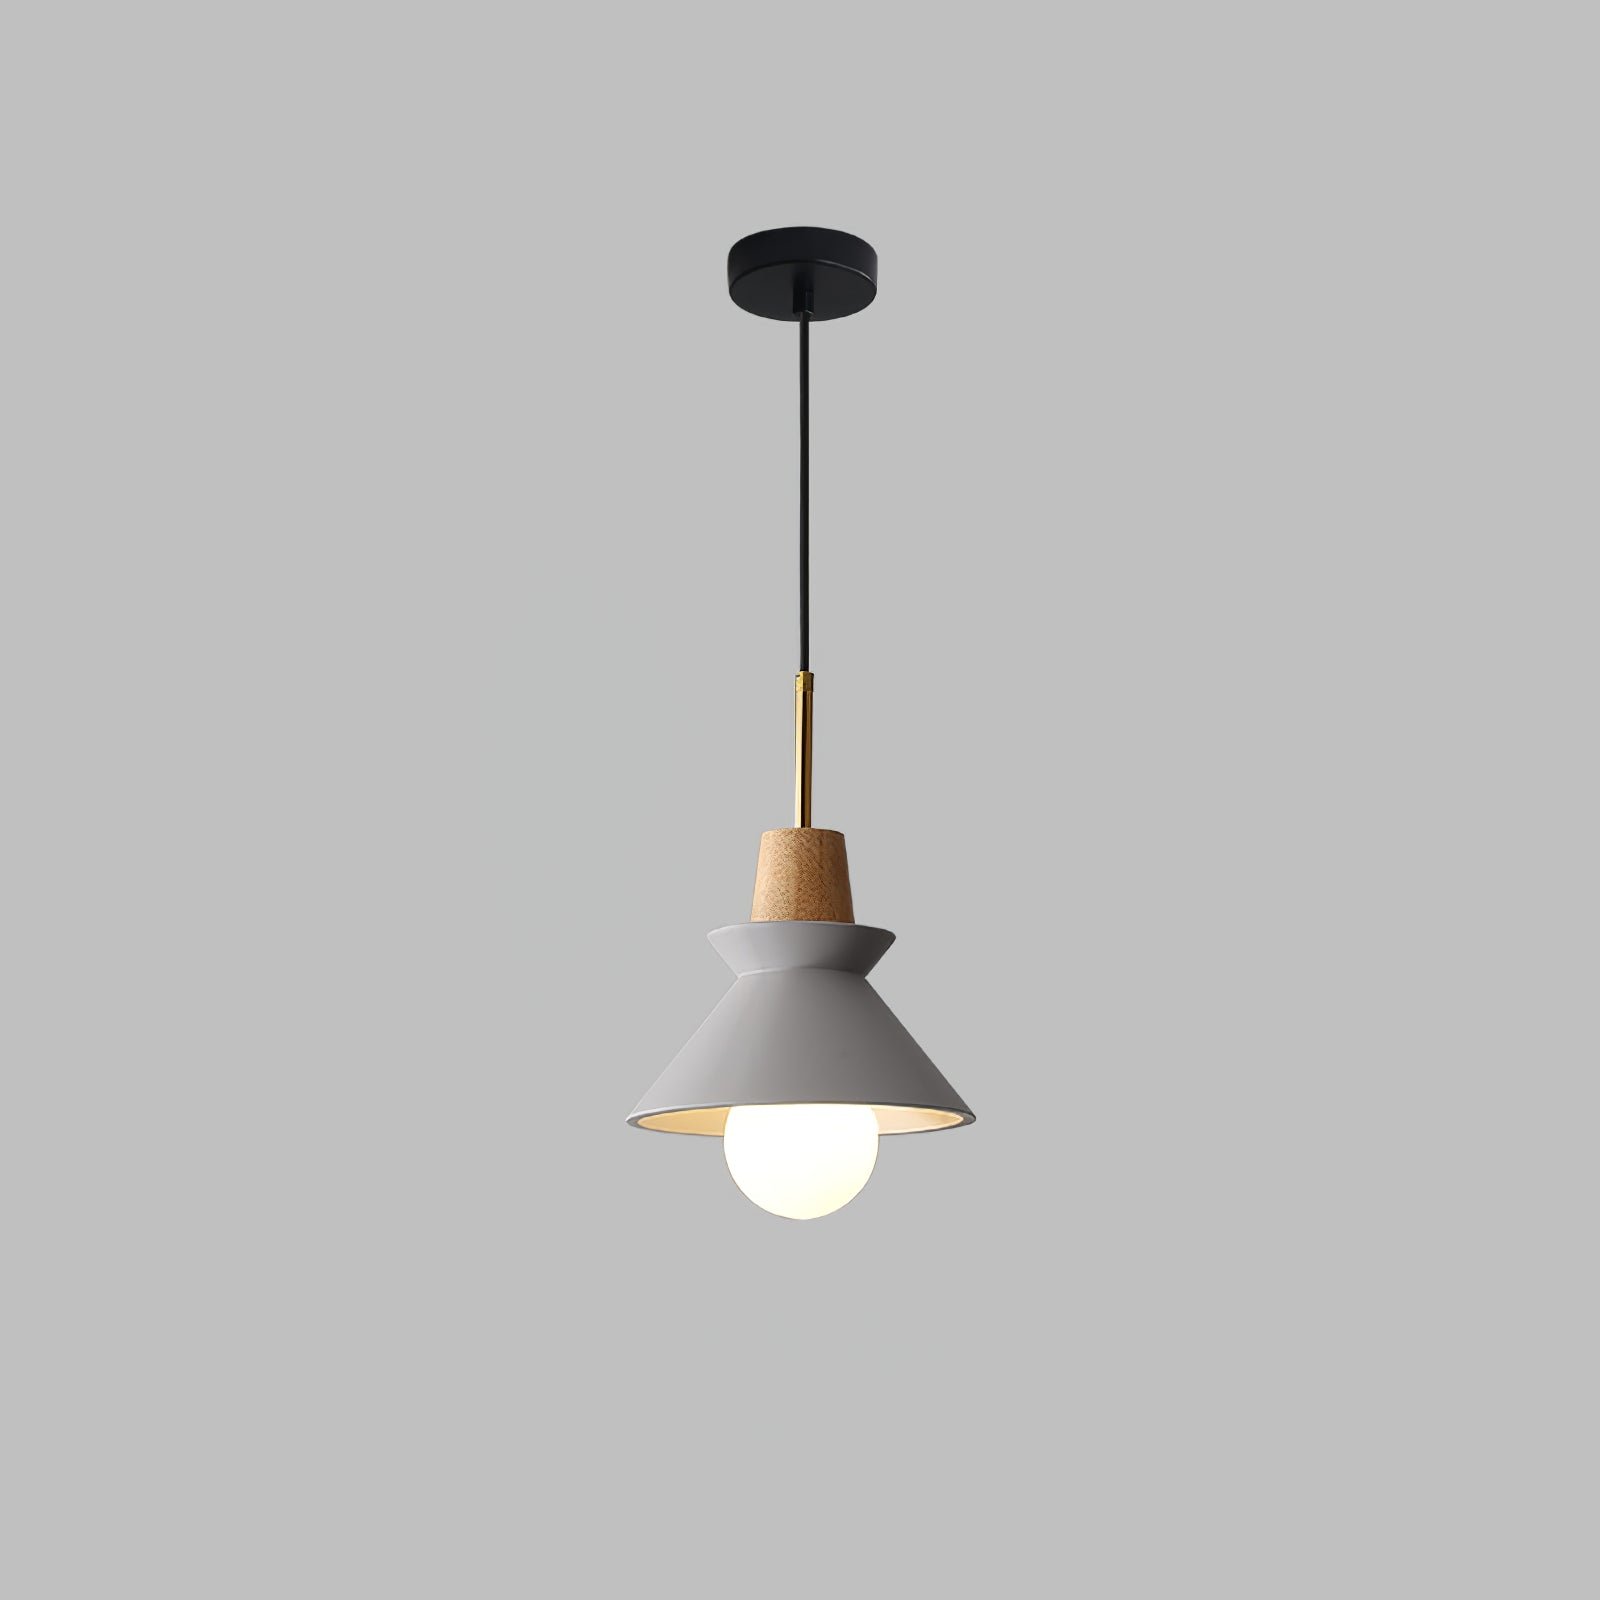 Grey Space Pendant Lamp with a diameter of 8.6 inches and a height of 12.9 inches (22cm x 33cm)